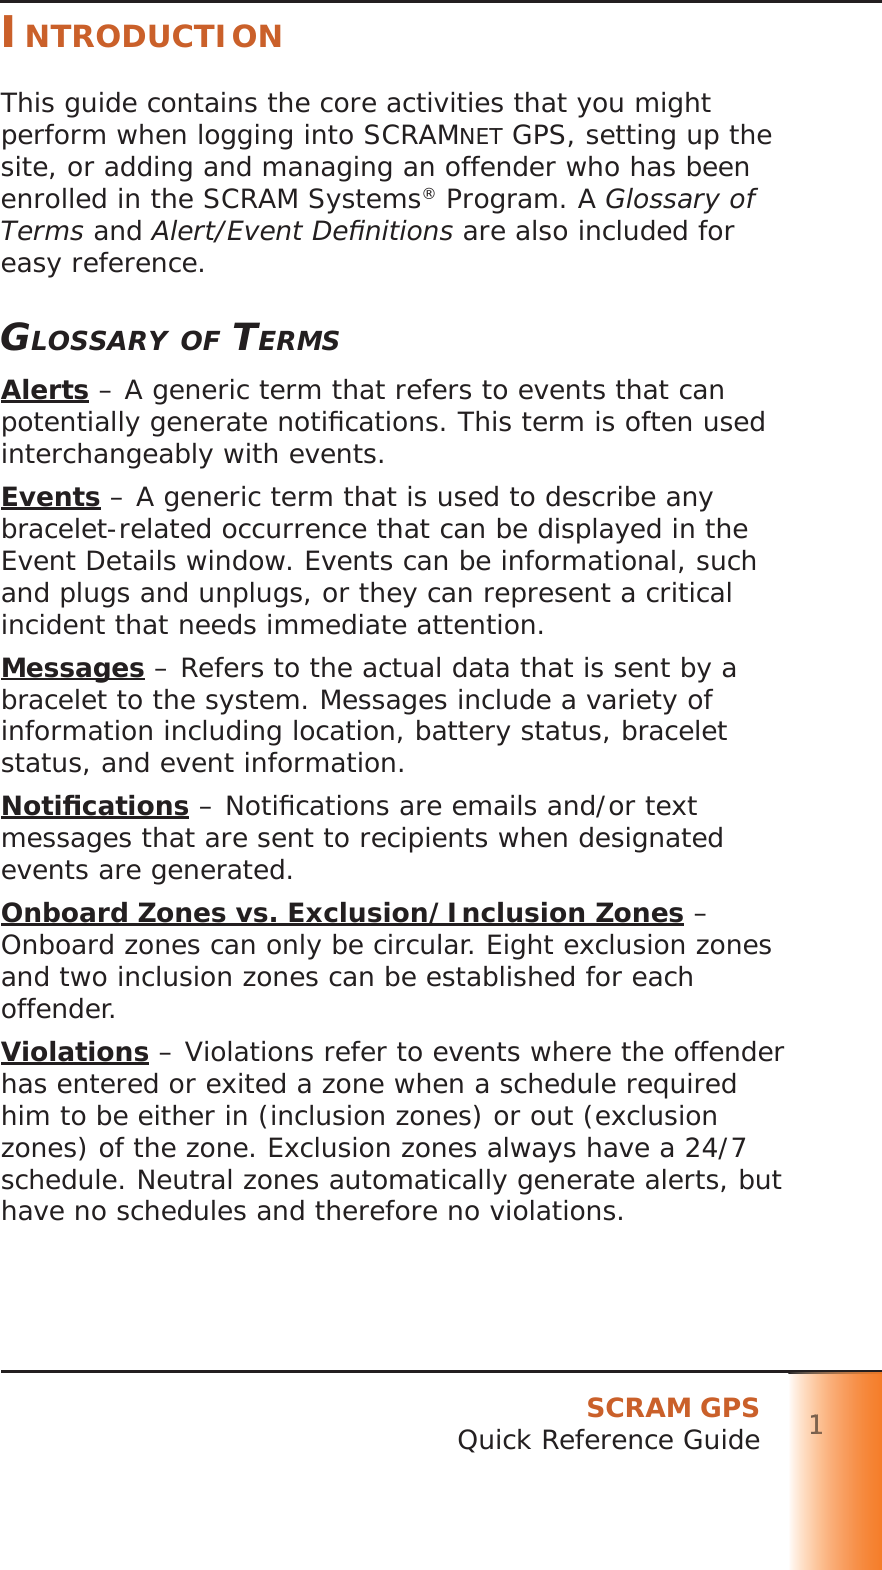 SCRAM GPSQuick Reference Guide 111111INTRODUCTIONThis guide contains the core activities that you might perform when logging into SCRAMNET GPS, setting up the site, or adding and managing an offender who has been enrolled in the SCRAM Systems® Program. A Glossary of Terms and Alert/Event Deﬁ nitions are also included for easy reference.GLOSSARY OF TERMSAlerts – A generic term that refers to events that can potentially generate notiﬁ cations. This term is often used interchangeably with events.Events – A generic term that is used to describe any bracelet-related occurrence that can be displayed in the Event Details window. Events can be informational, such and plugs and unplugs, or they can represent a critical incident that needs immediate attention.Messages – Refers to the actual data that is sent by a bracelet to the system. Messages include a variety of information including location, battery status, bracelet status, and event information.Notiﬁ cations – Notiﬁ cations are emails and/or text messages that are sent to recipients when designated events are generated.Onboard Zones vs. Exclusion/Inclusion Zones – Onboard zones can only be circular. Eight exclusion zones and two inclusion zones can be established for each offender.Violations – Violations refer to events where the offender has entered or exited a zone when a schedule required him to be either in (inclusion zones) or out (exclusion zones) of the zone. Exclusion zones always have a 24/7 schedule. Neutral zones automatically generate alerts, but have no schedules and therefore no violations.